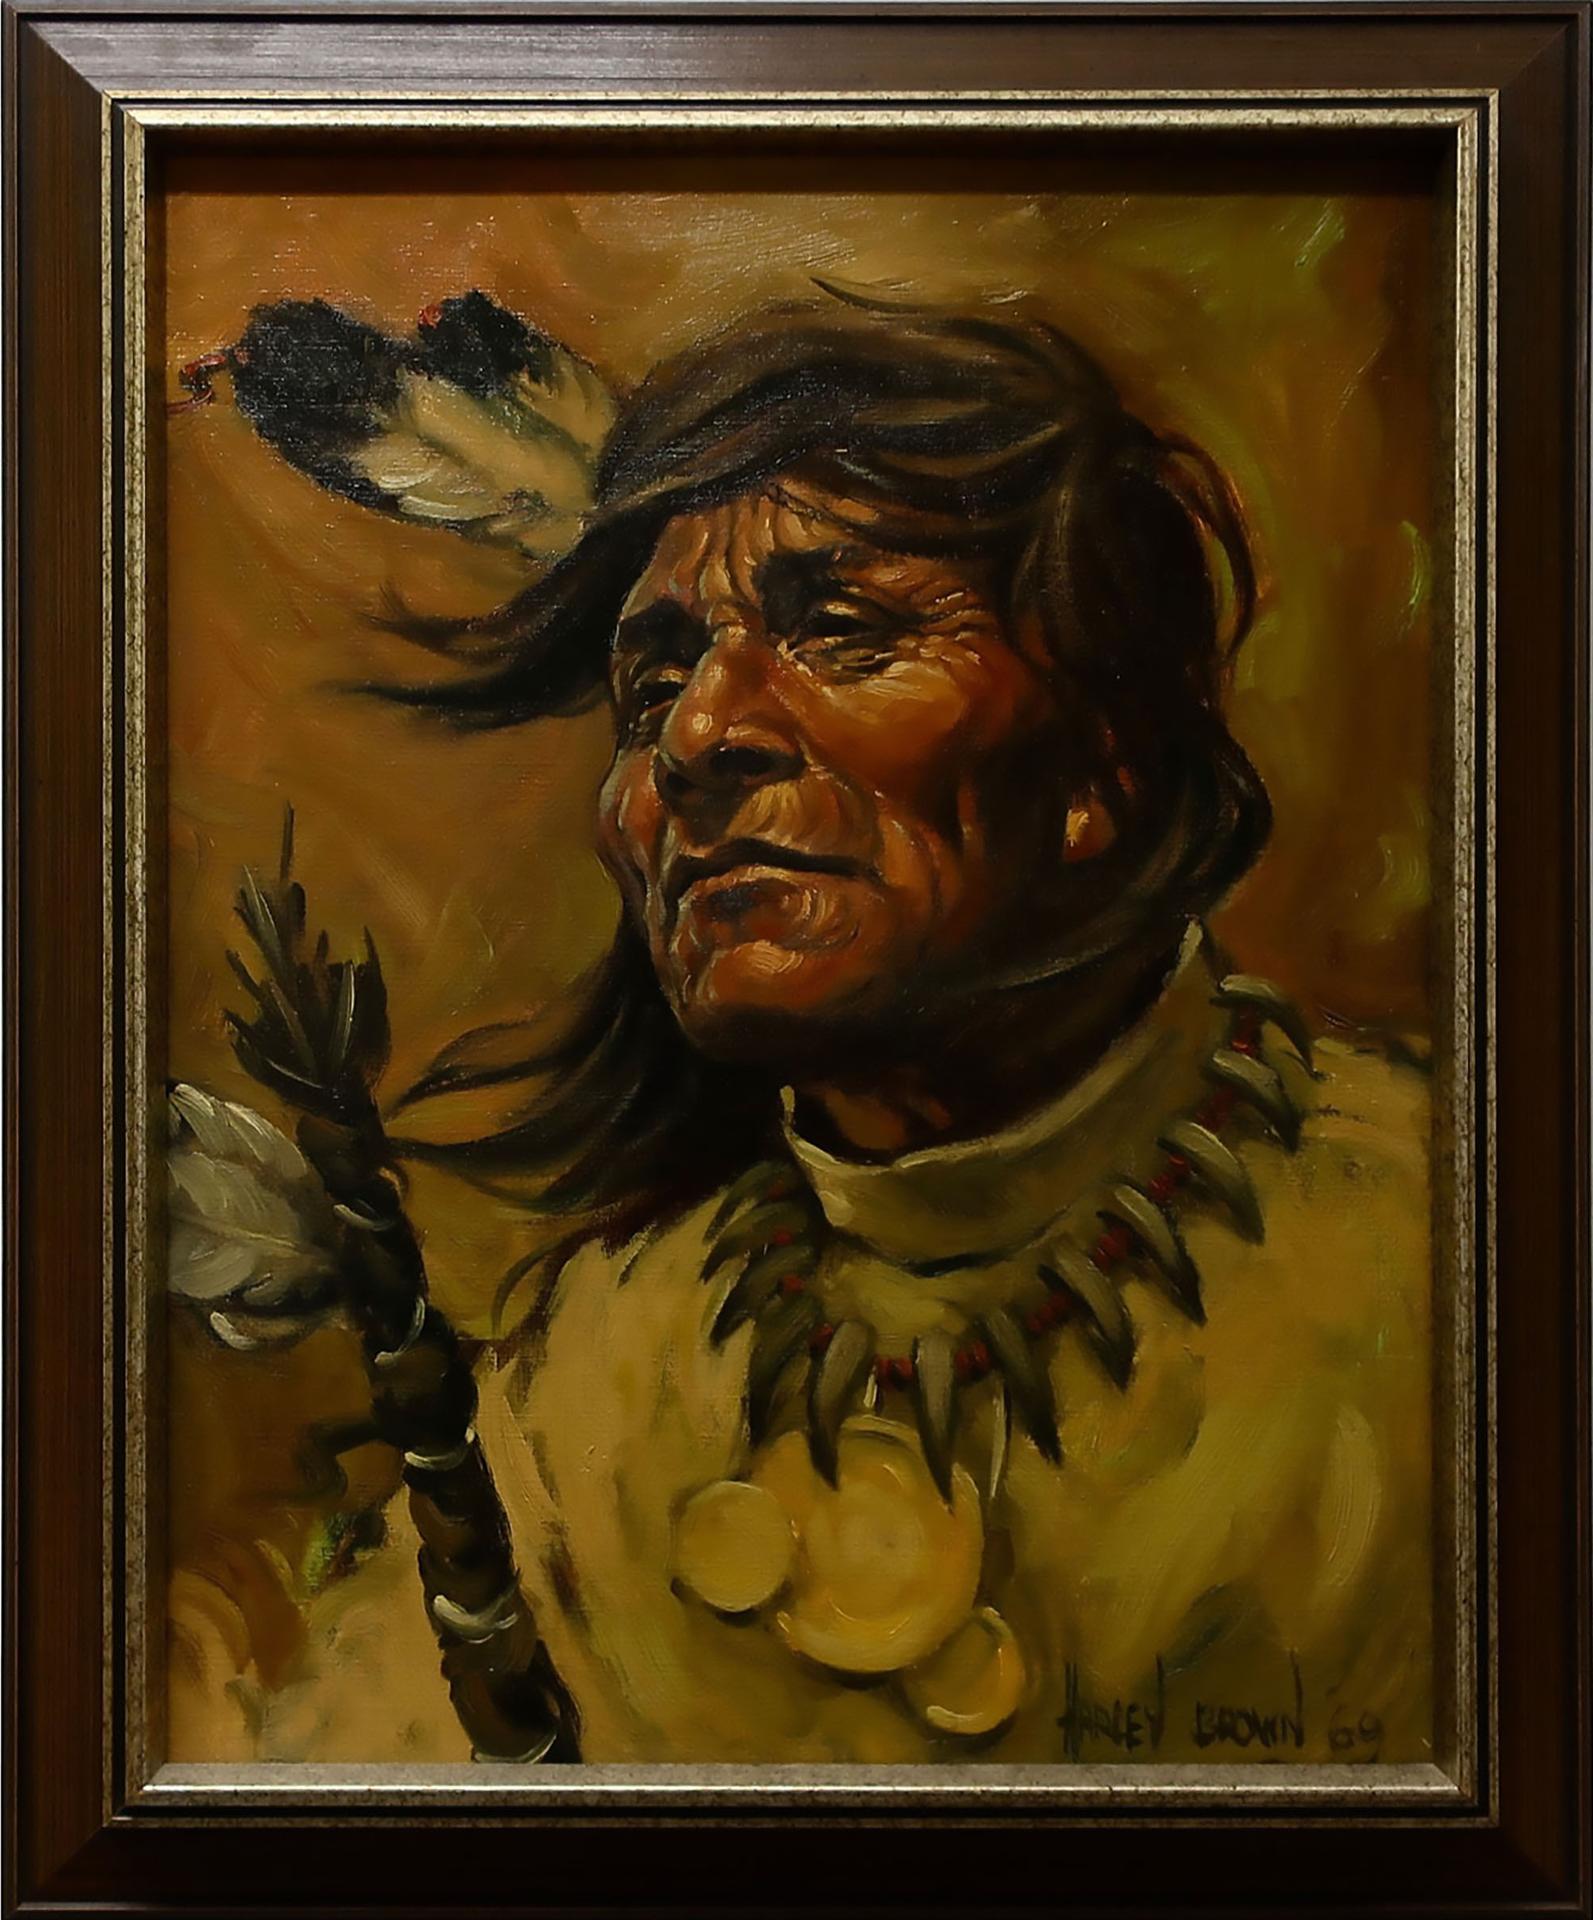 Harley W. Brown (1939) - Portrait Of An Indigenous Man